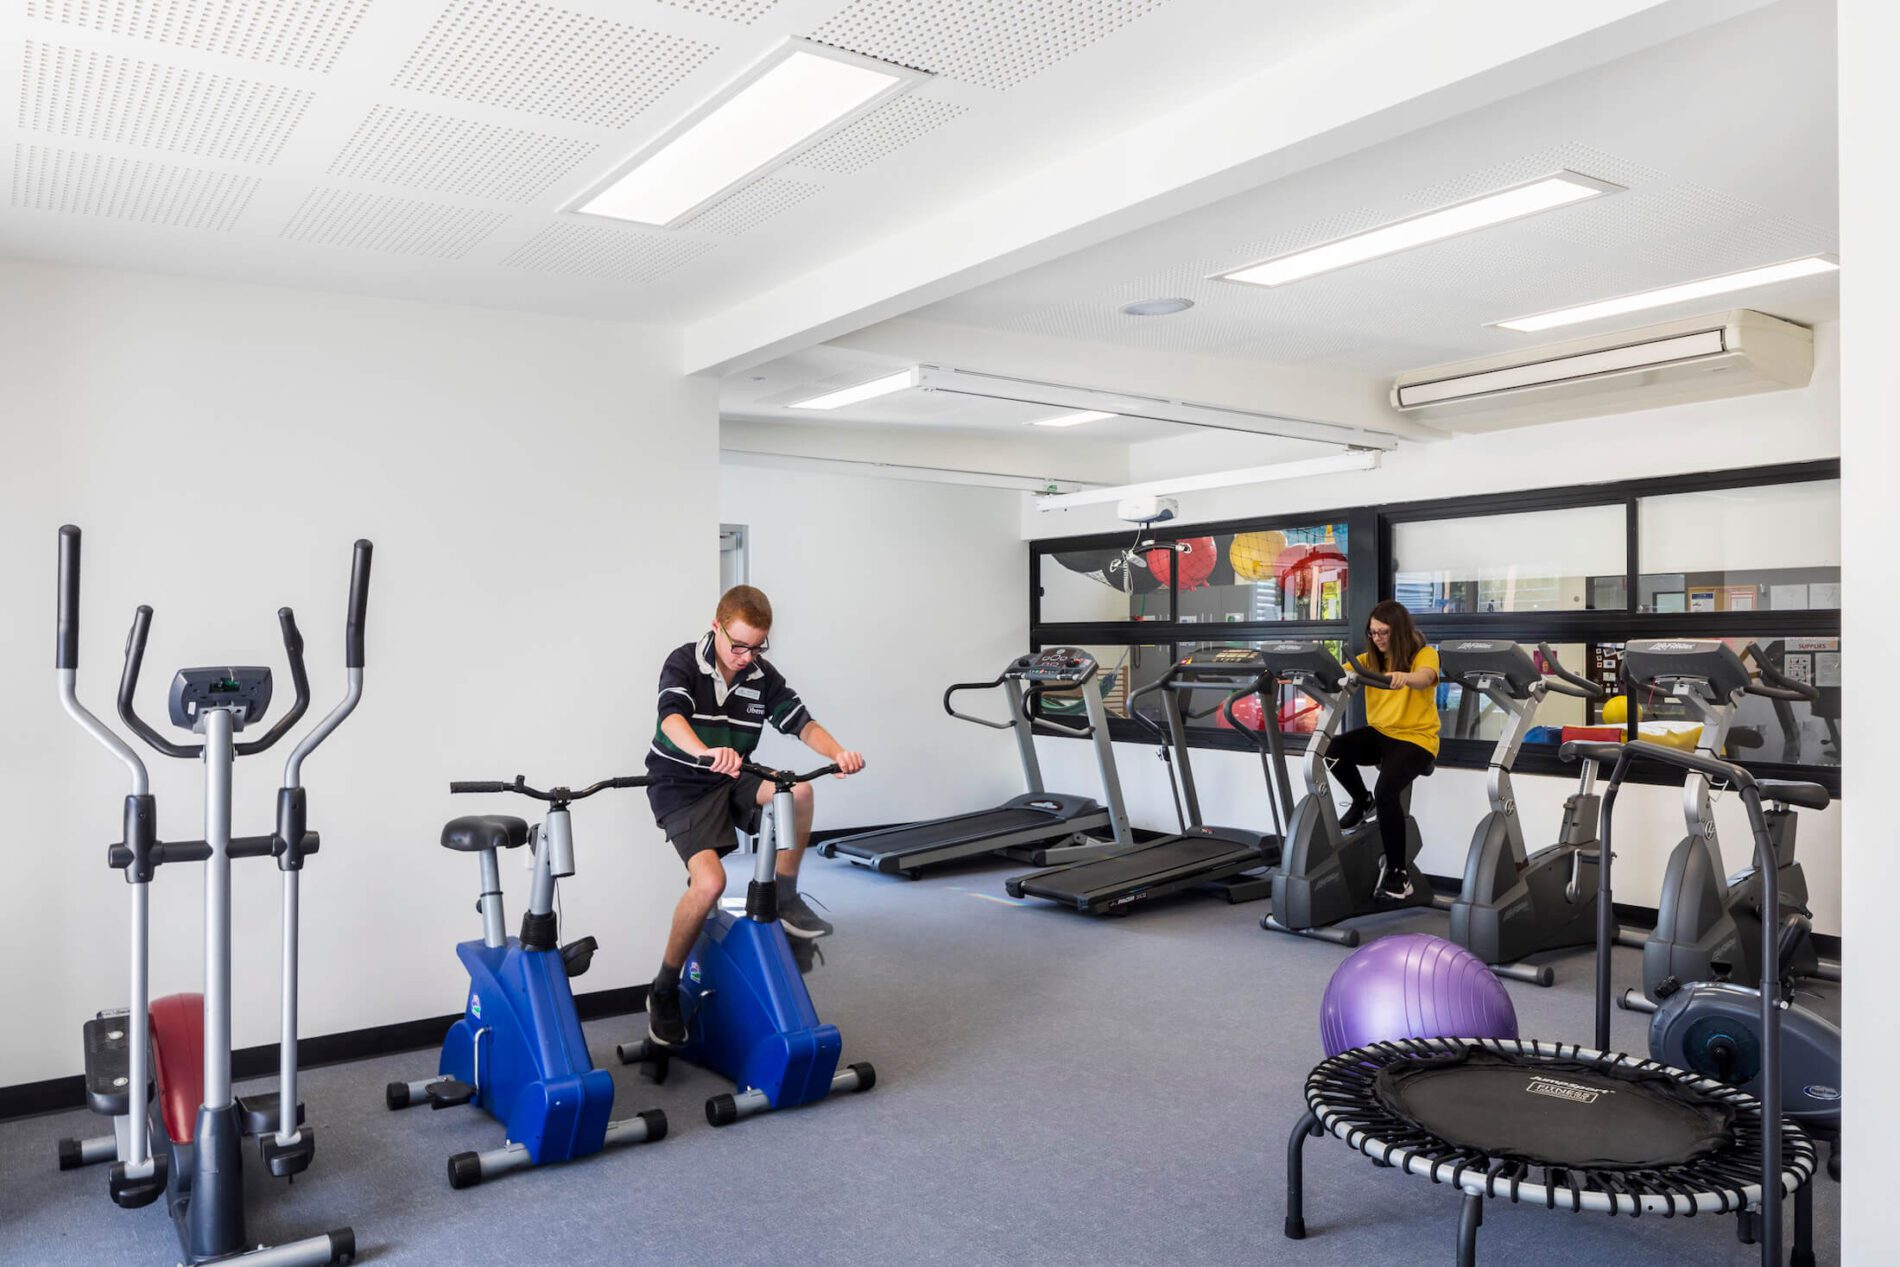 Students use exercise bikes in physical therapy room